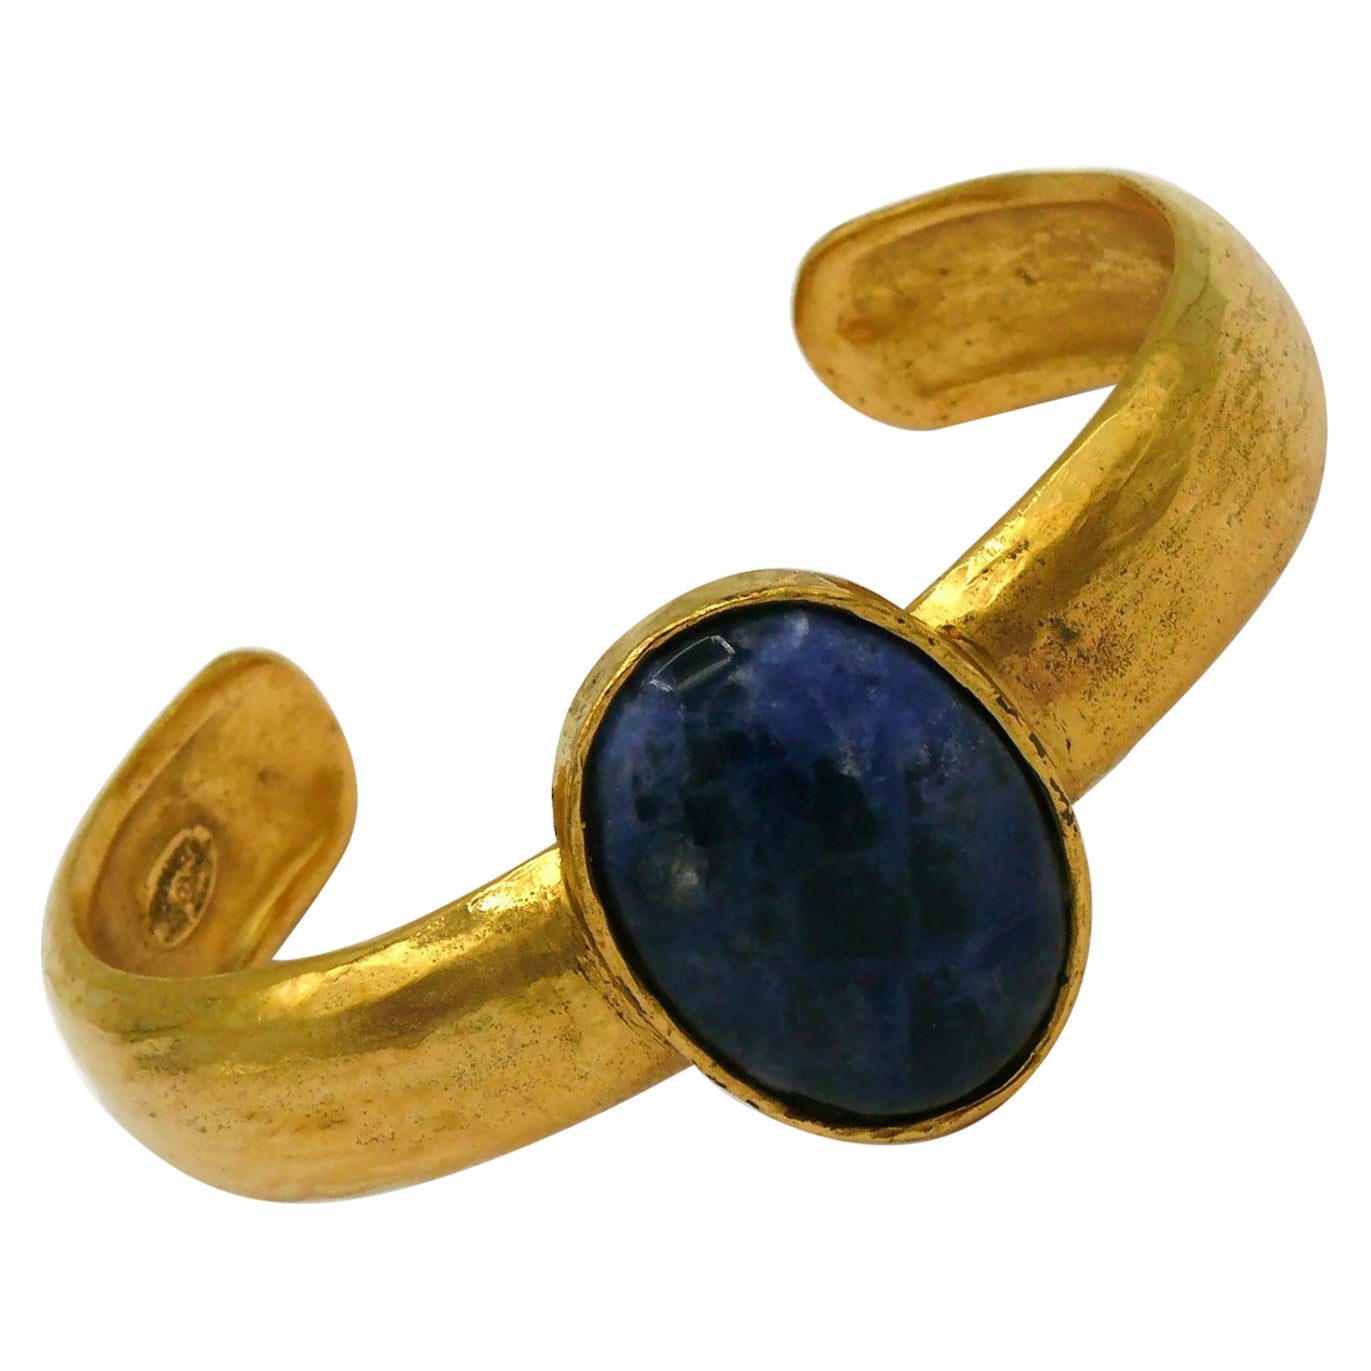 CHANEL by KARL LAGERFELD Vintage Gold Tone Blue Stone Bangle Bracelet, Fall 1996 For Sale